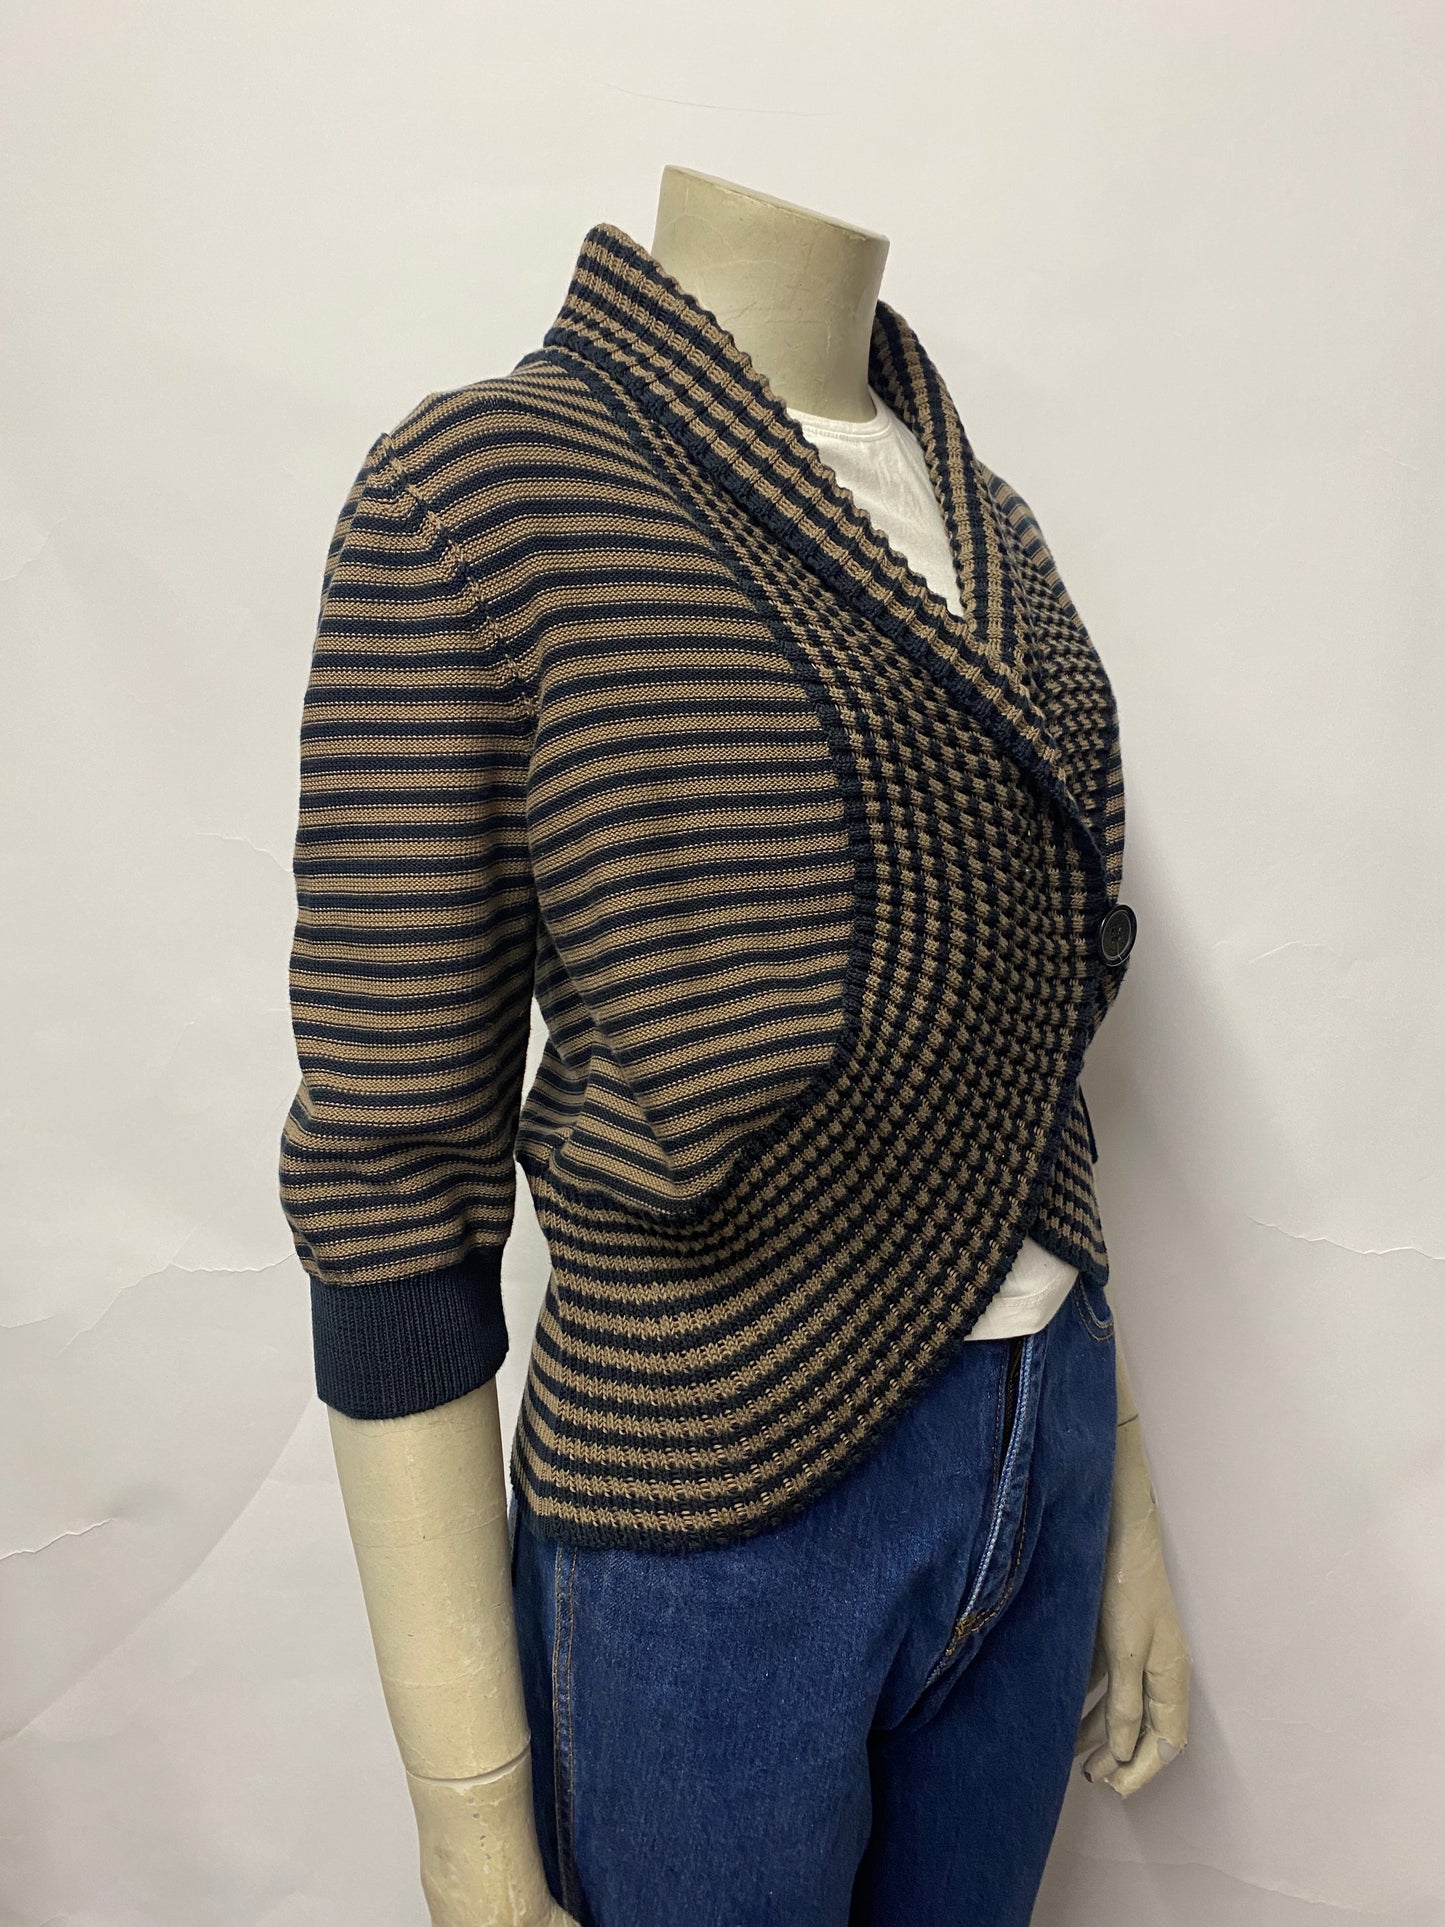 Sonia Rykiel Brown and Navy Stripe Cropped Cotton Cardigan 14